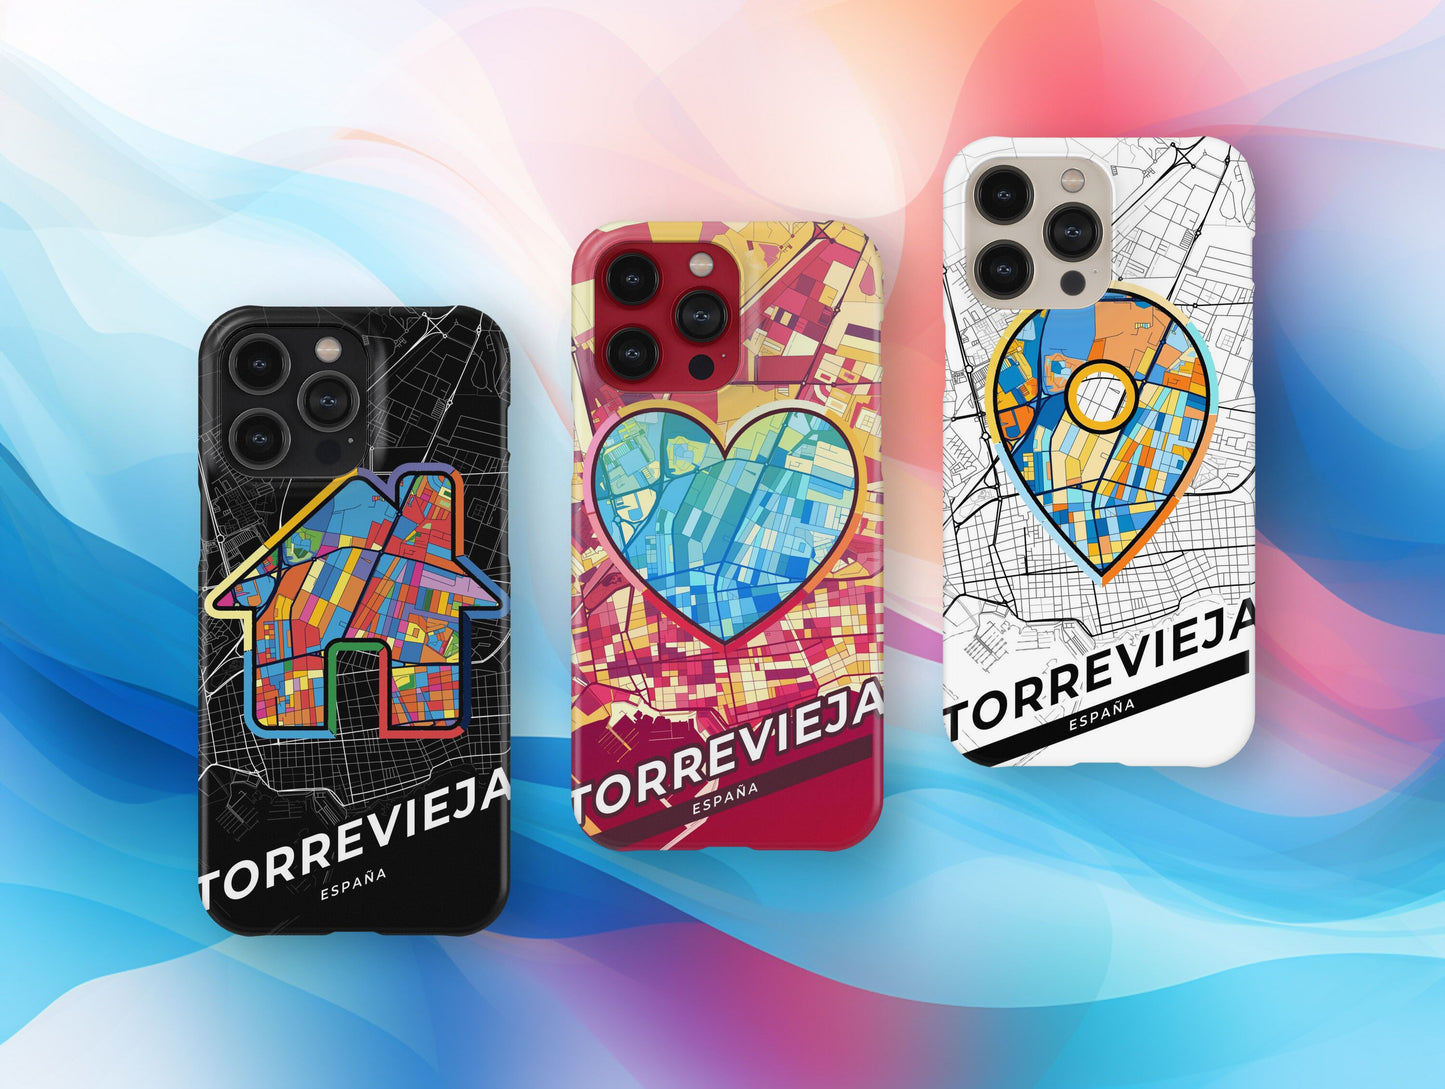 Torrevieja Spain slim phone case with colorful icon